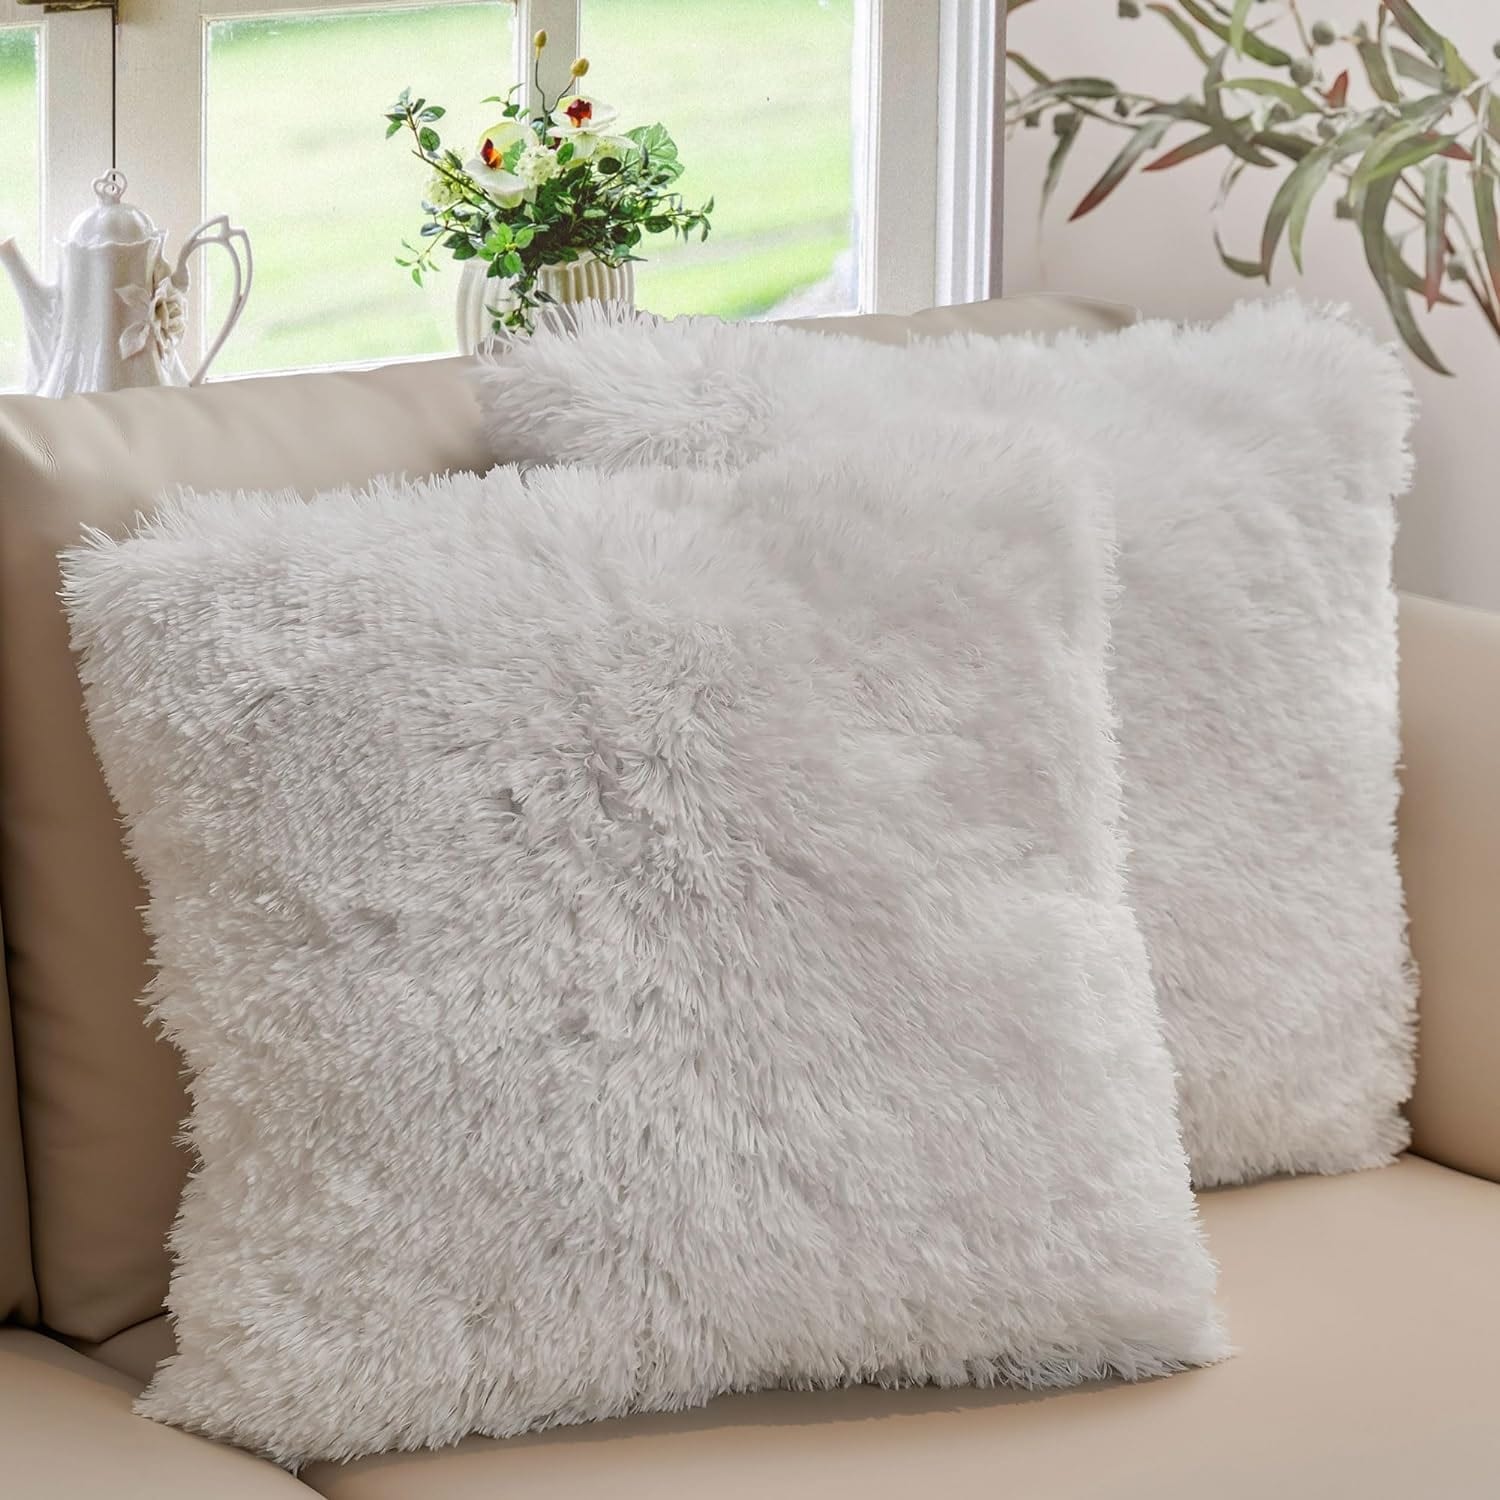 https://ak1.ostkcdn.com/images/products/is/images/direct/1a26043bbc25557d4b149998023817e32dc60e44/Cheer-Collection-Shaggy-Long-Hair-Throw-Pillows-%28Set-of-2%29.jpg